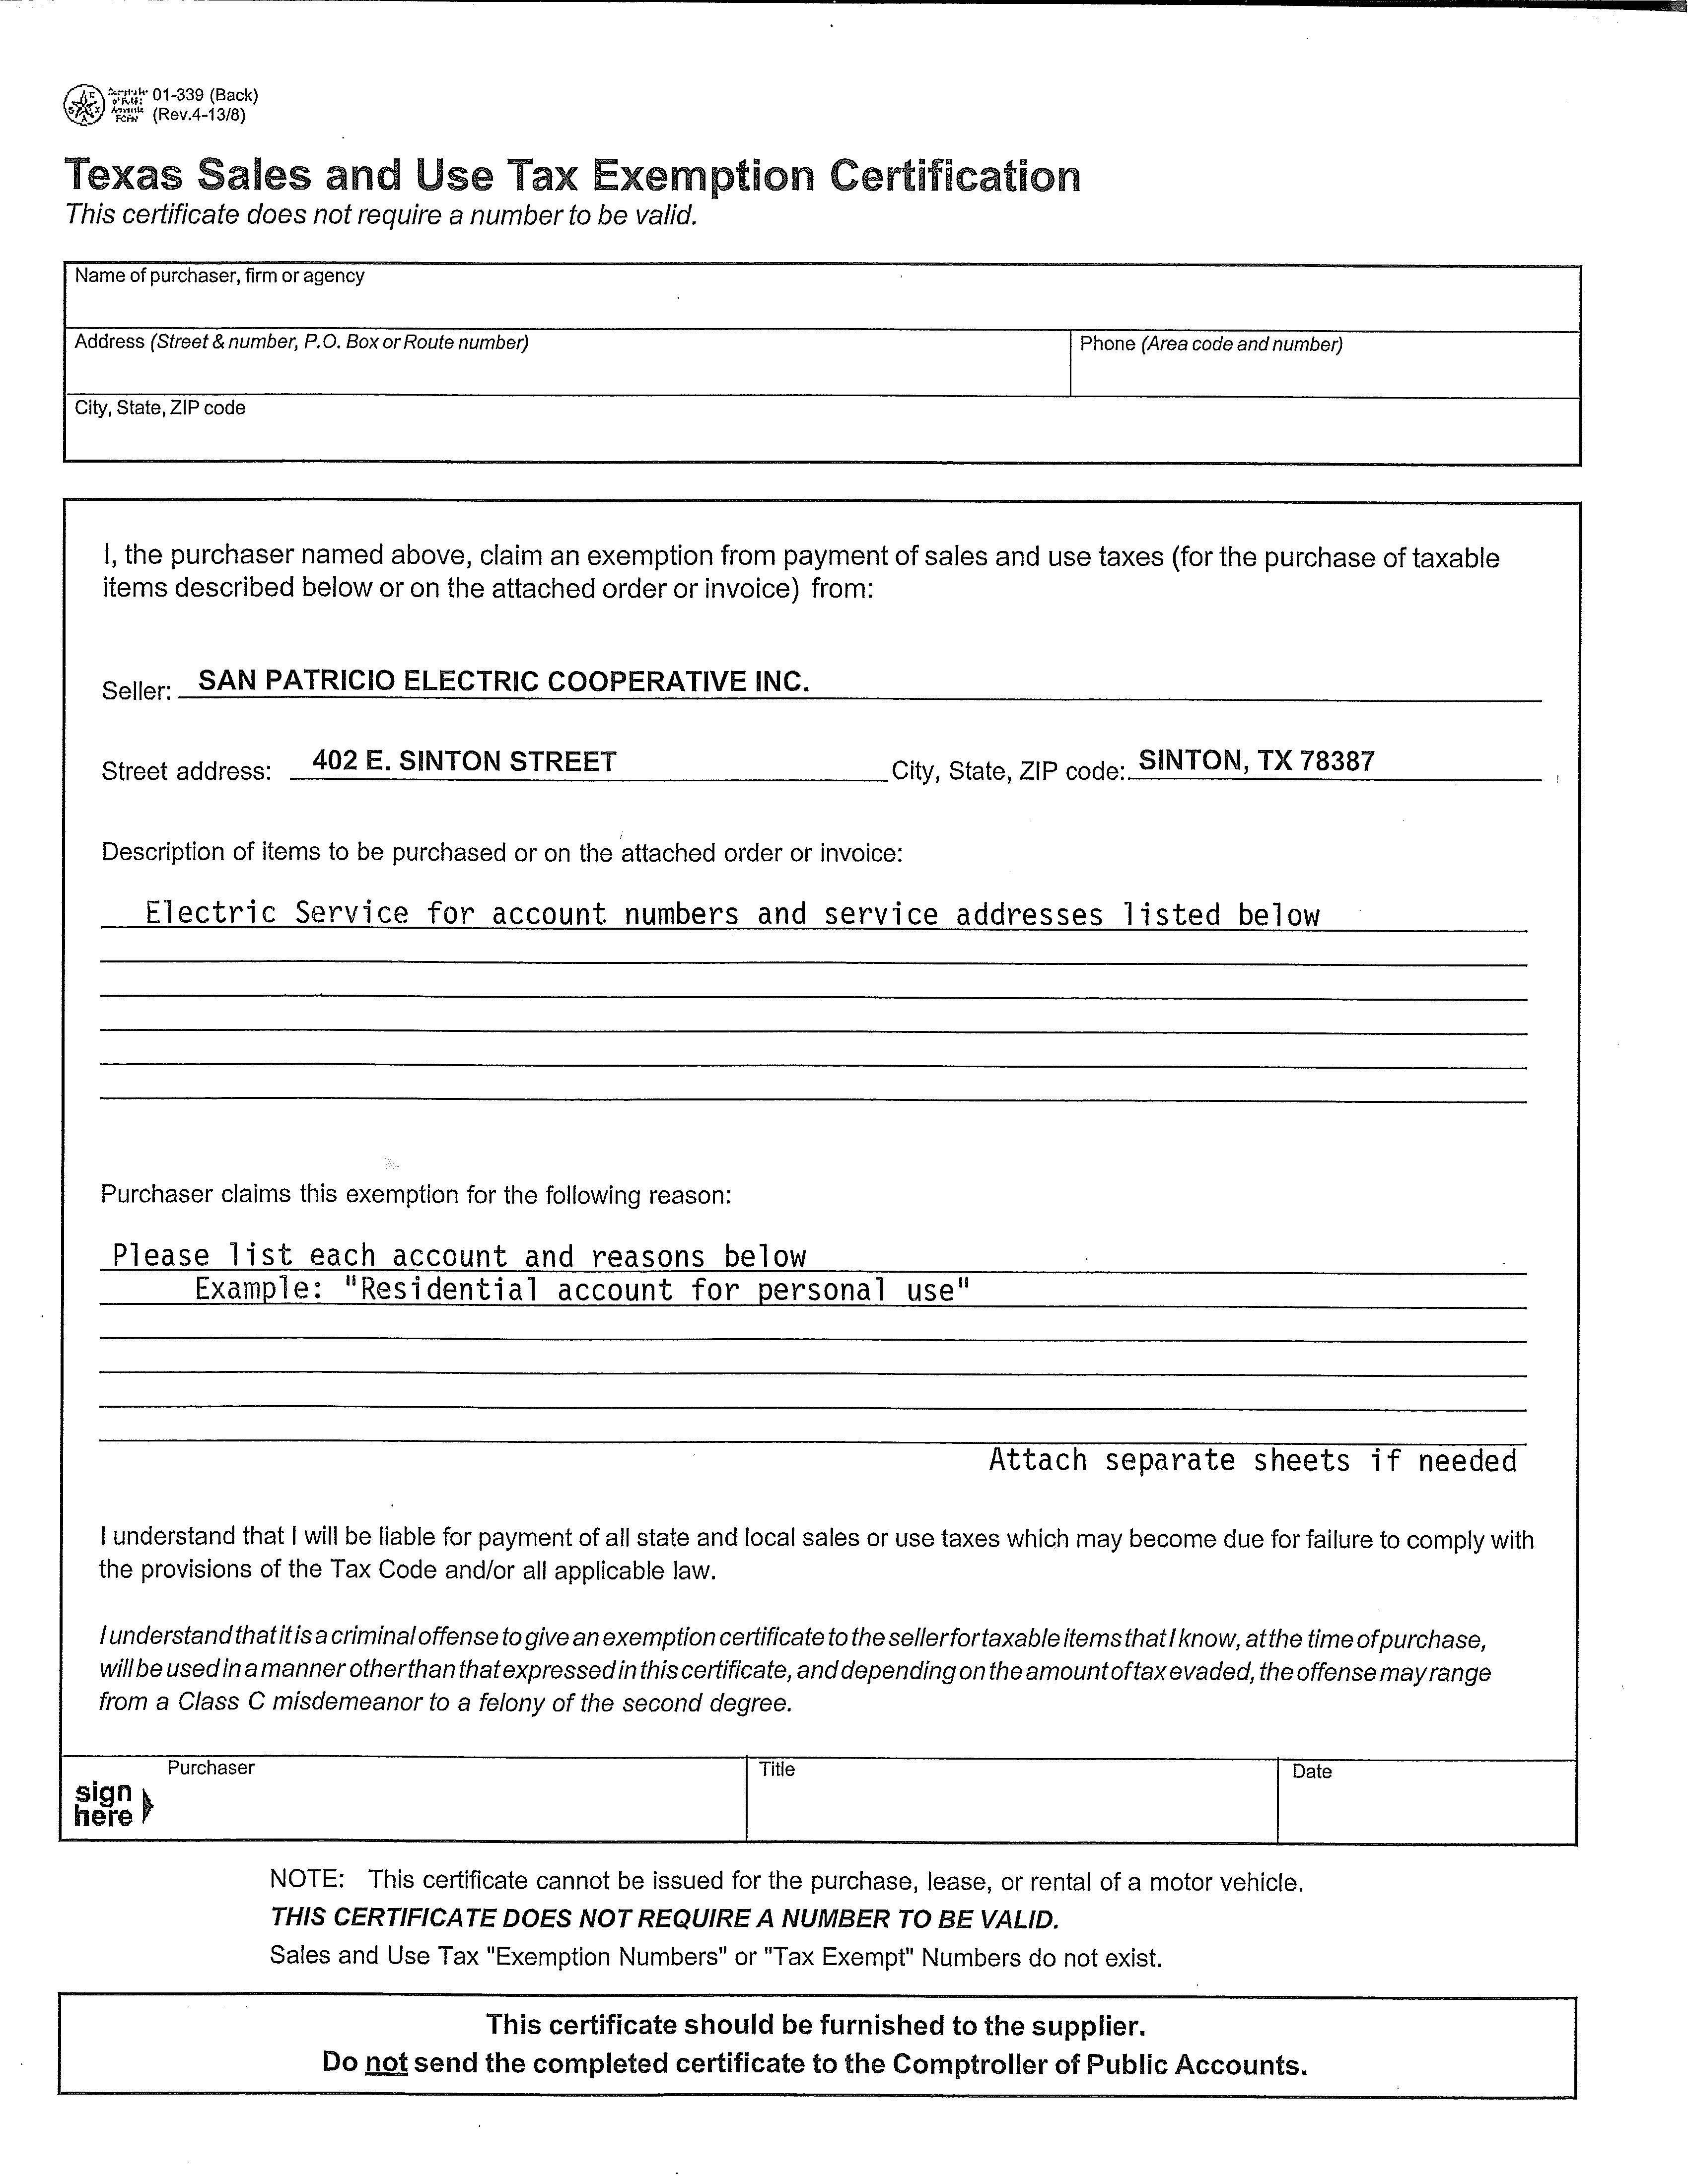 Example of completed Texas Tax Exempt Form